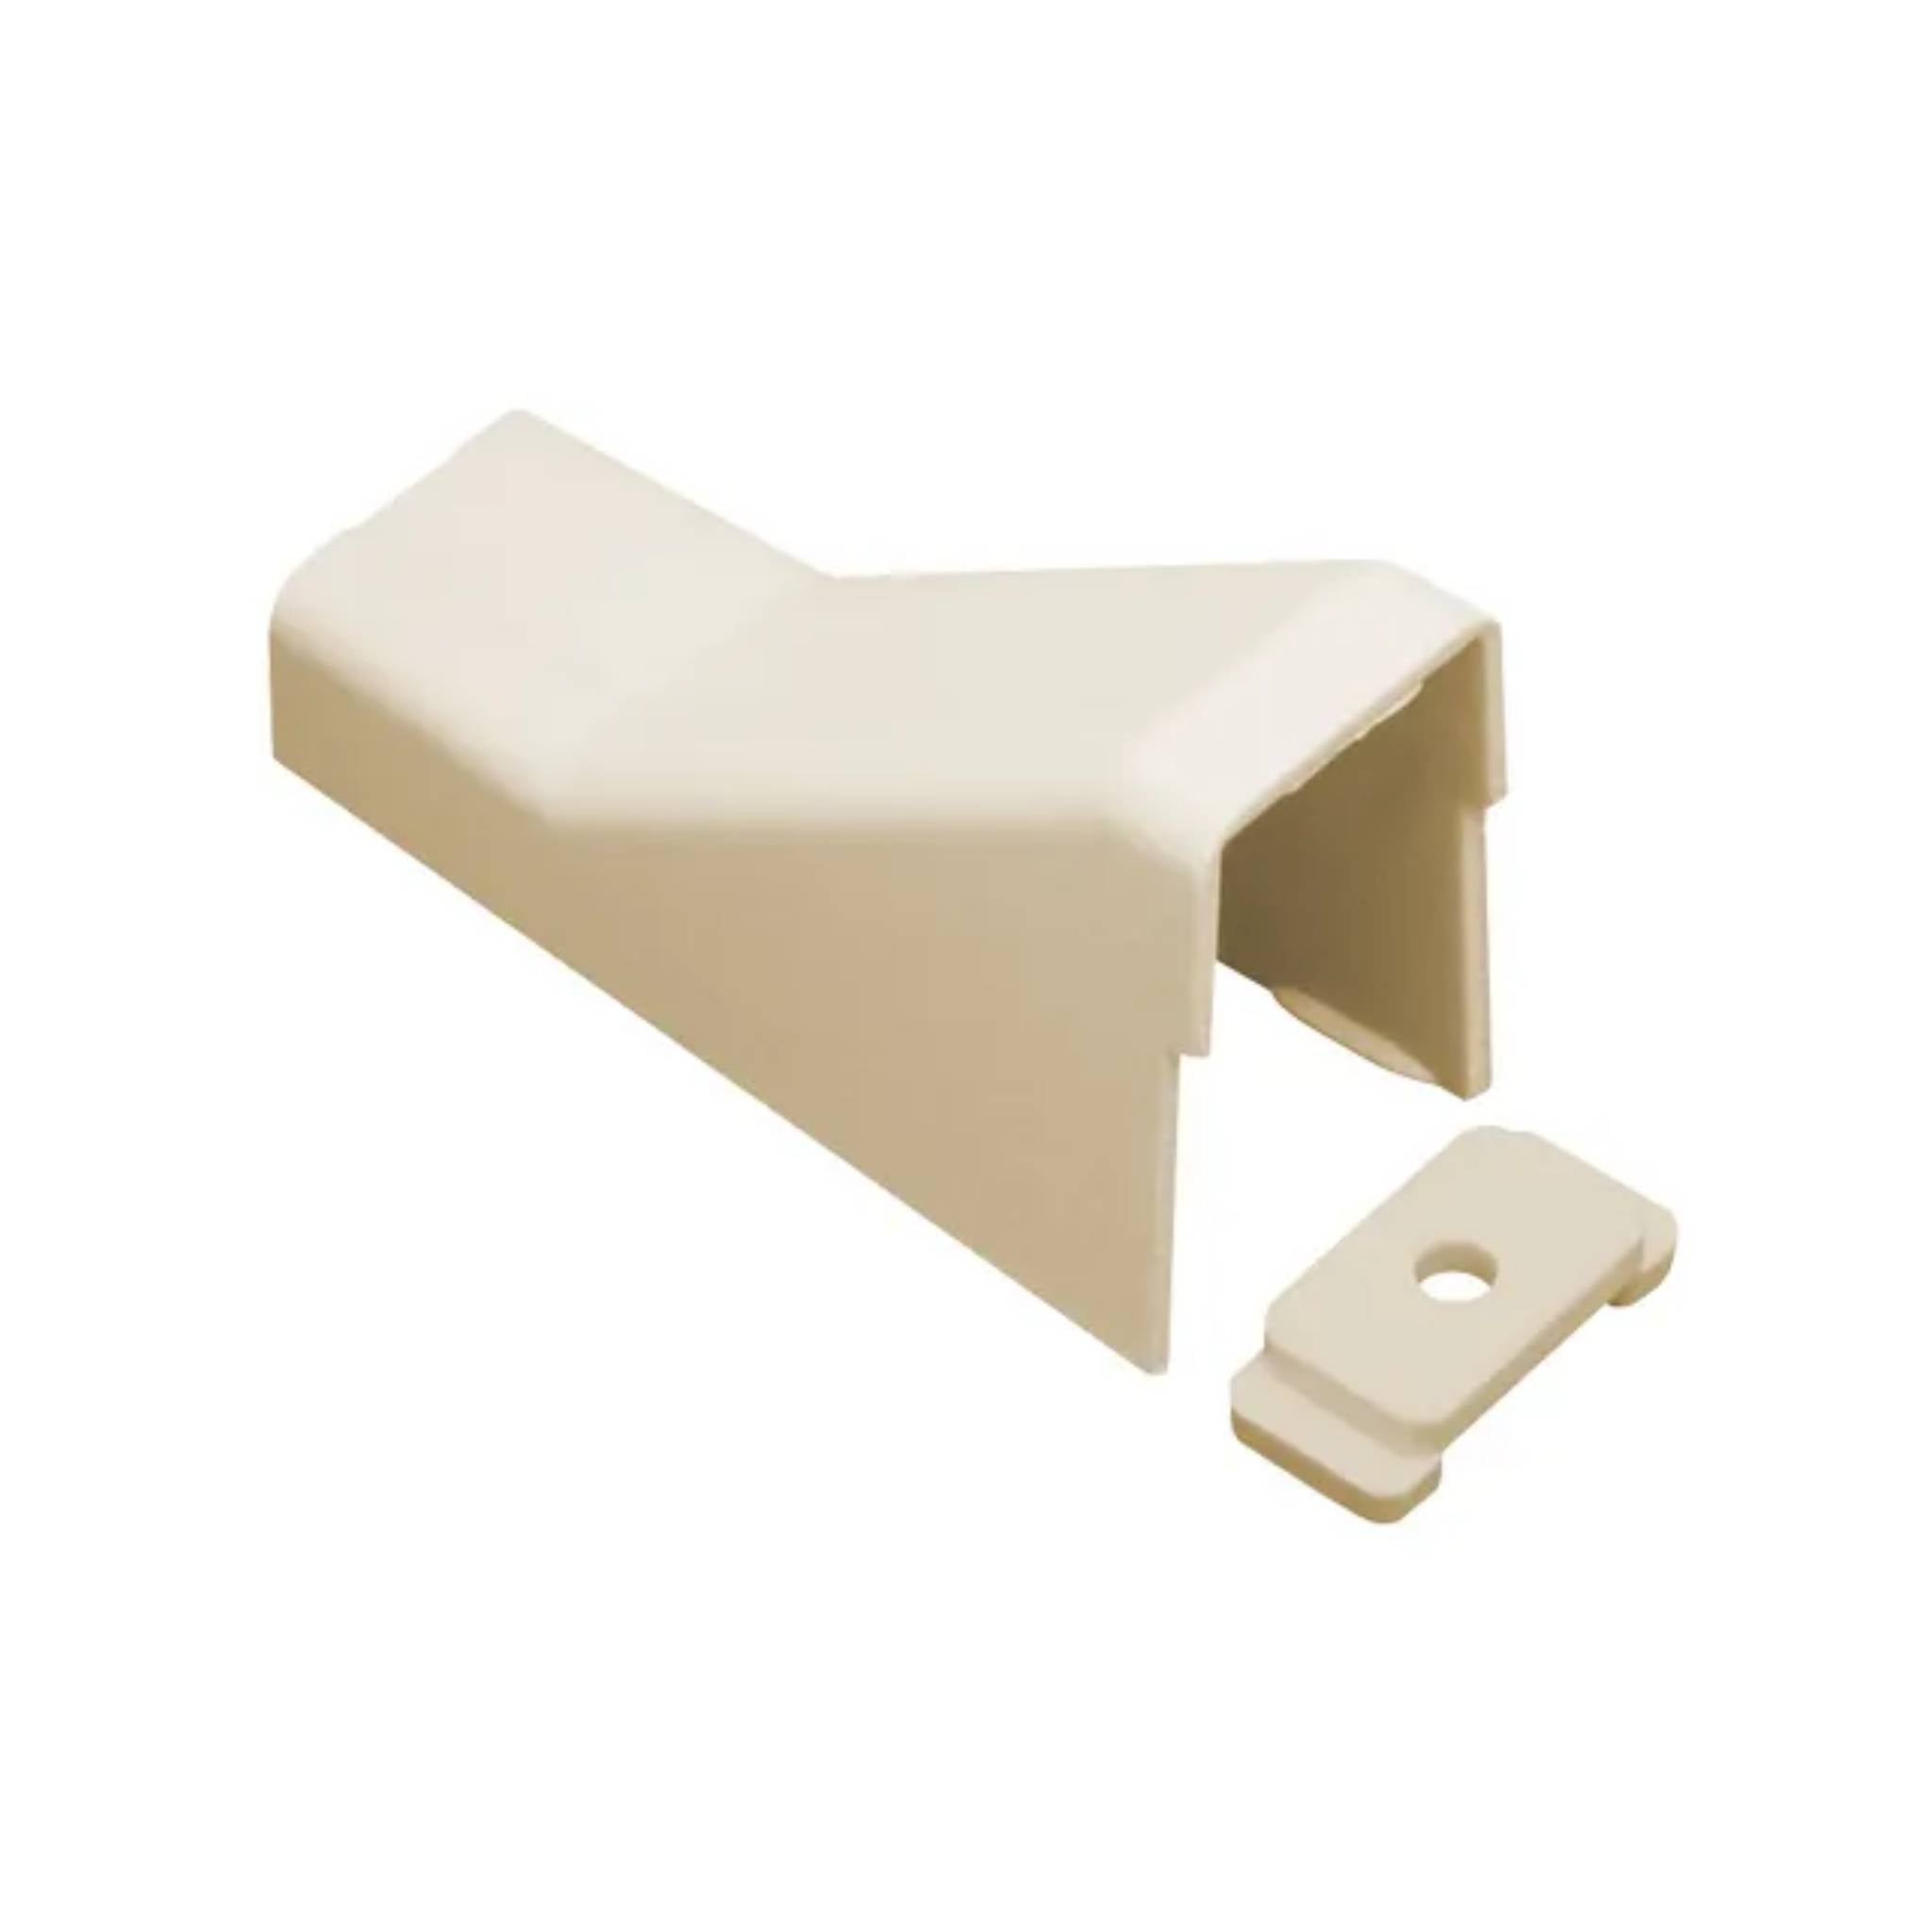 ICC Ceiling Entry & Clip, 1 1/4", Ivory